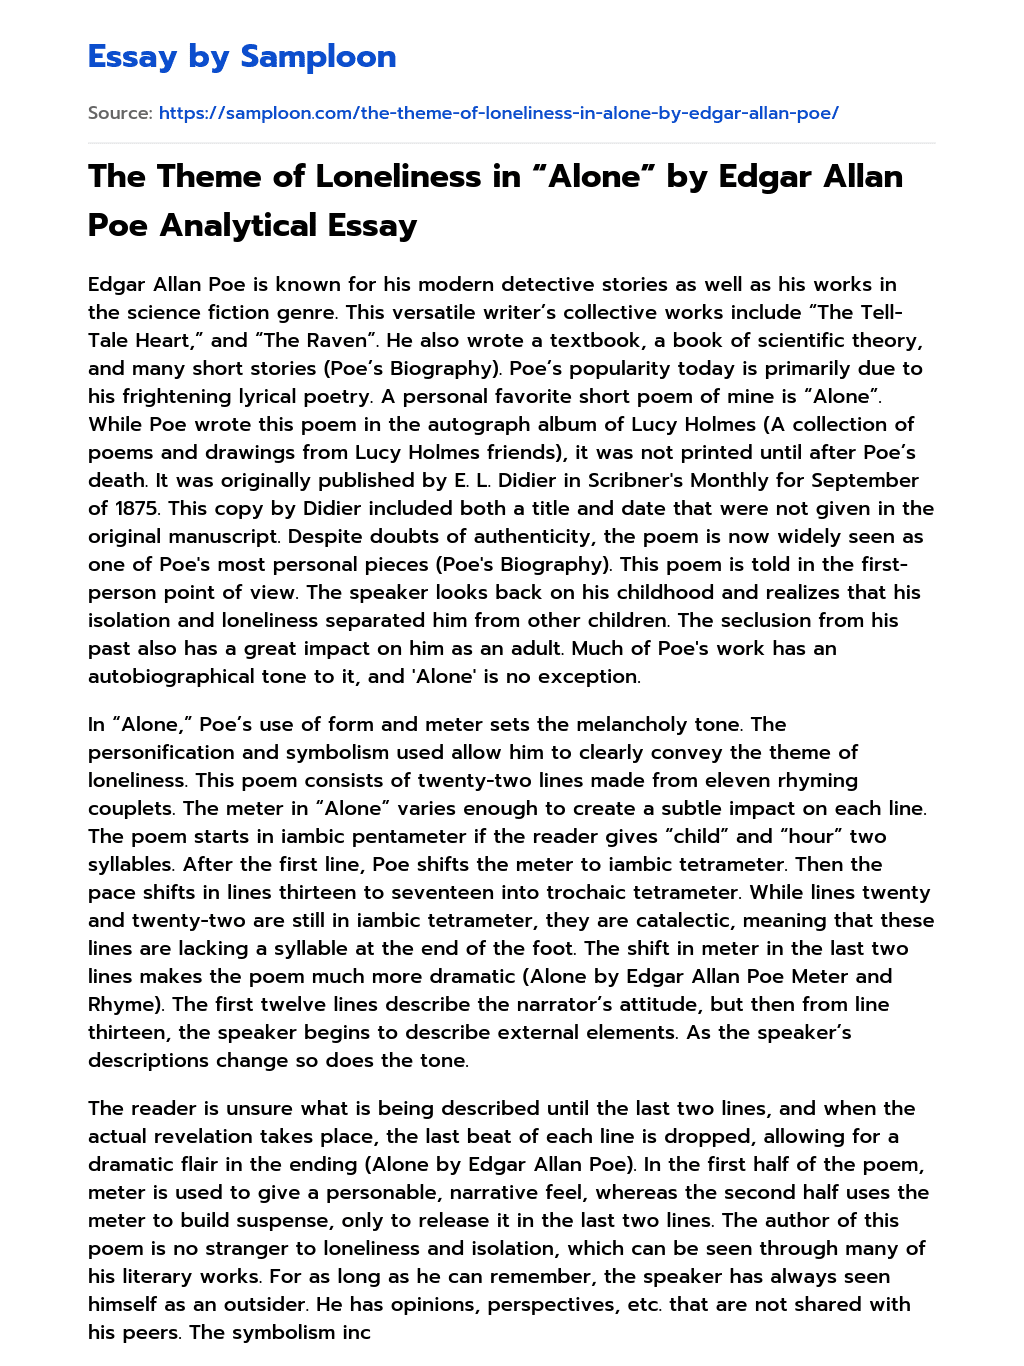 The Theme of Loneliness in “Alone” by Edgar Allan Poe Analytical Essay essay